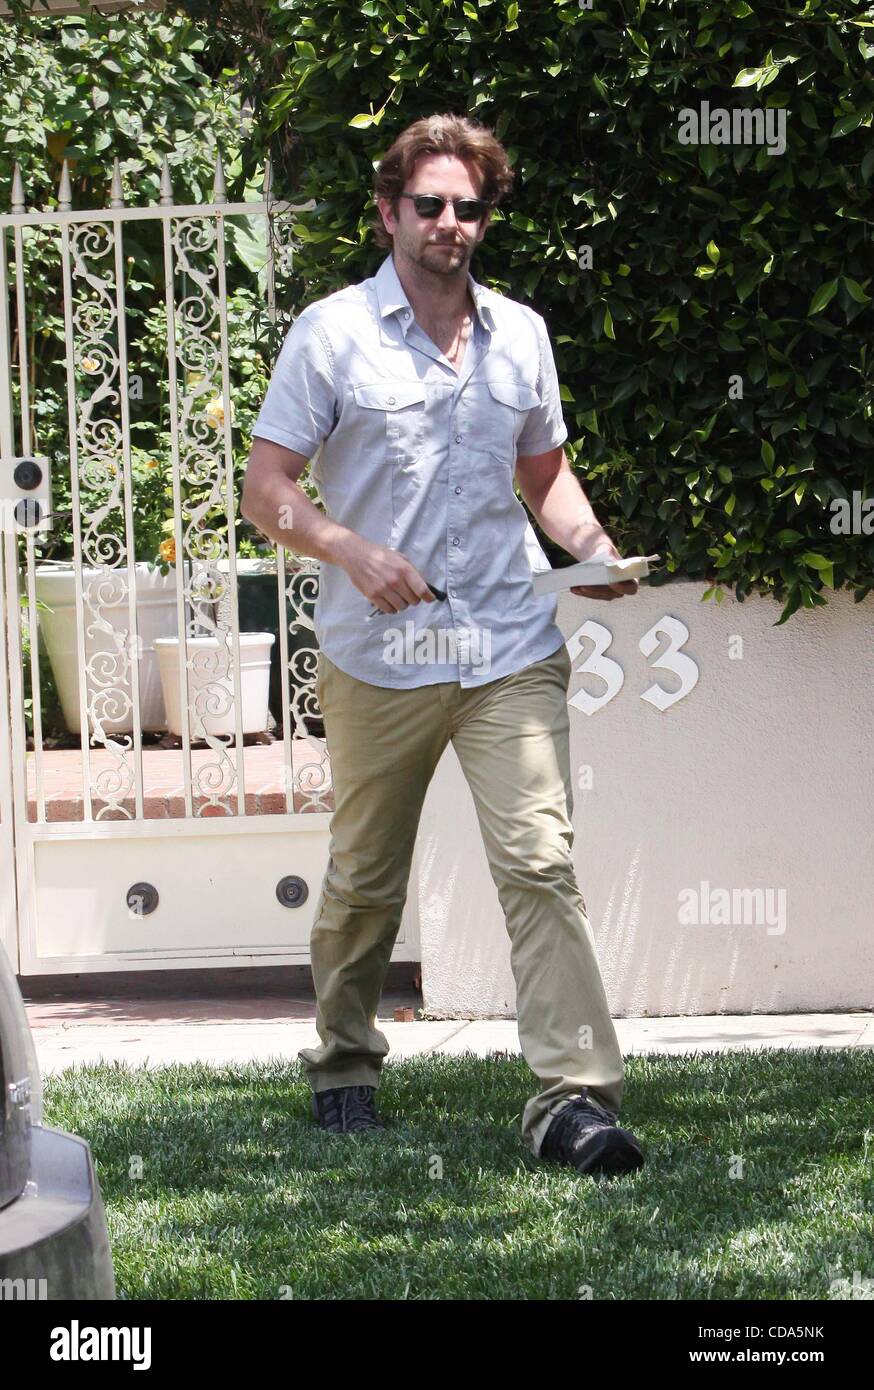 Aug. 06, 2010 - Los Angeles, California, U.S. - BRADLEY COOPER walking in Beverly Hills and getting in his car in Santa Monica after meeting with his acting coach on 8-6-2010. K65635VP.(Credit Image: Â© V.P./Globe Photos/ZUMApress.com) Stock Photo